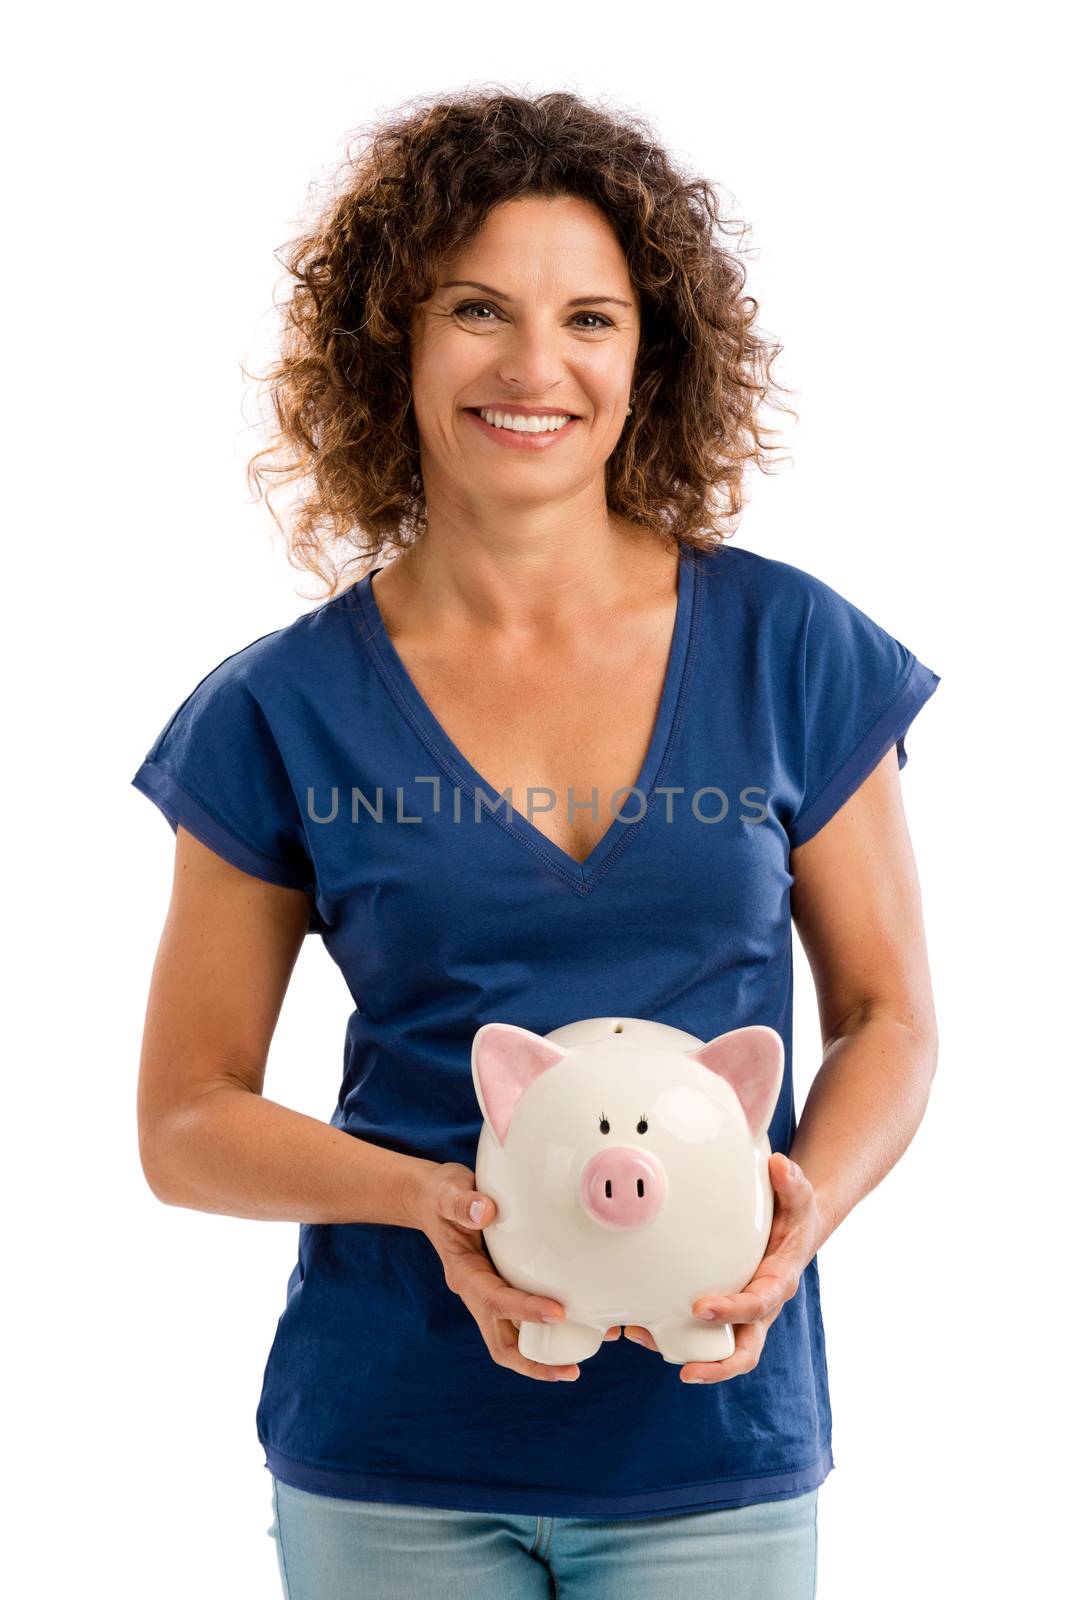 Portrait of a happy middle aged woman holding a Piggybank